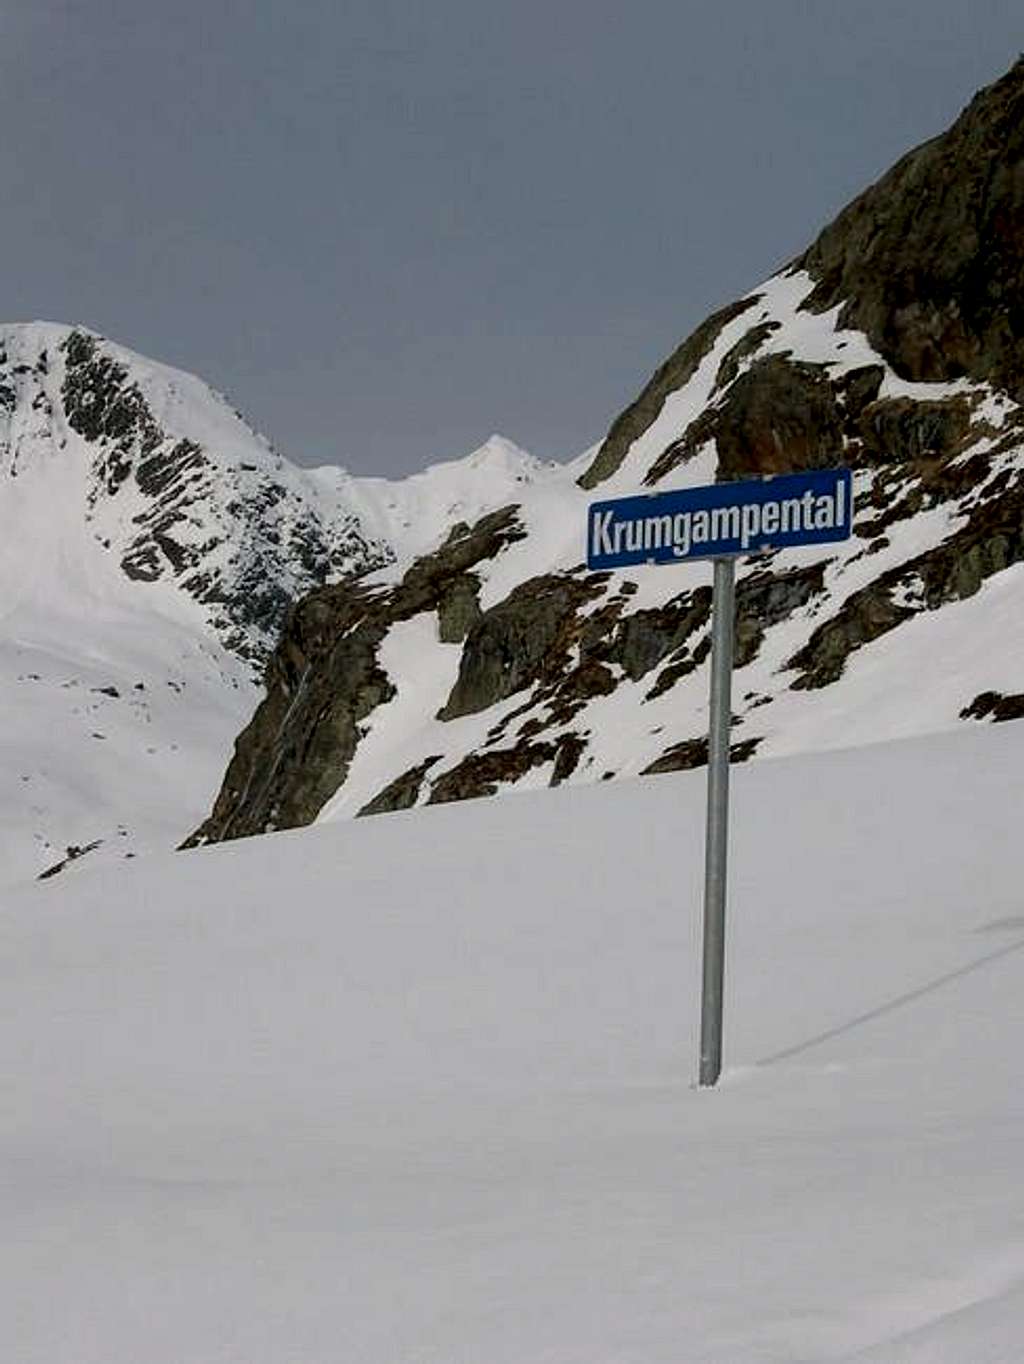 Starting point of the ski route